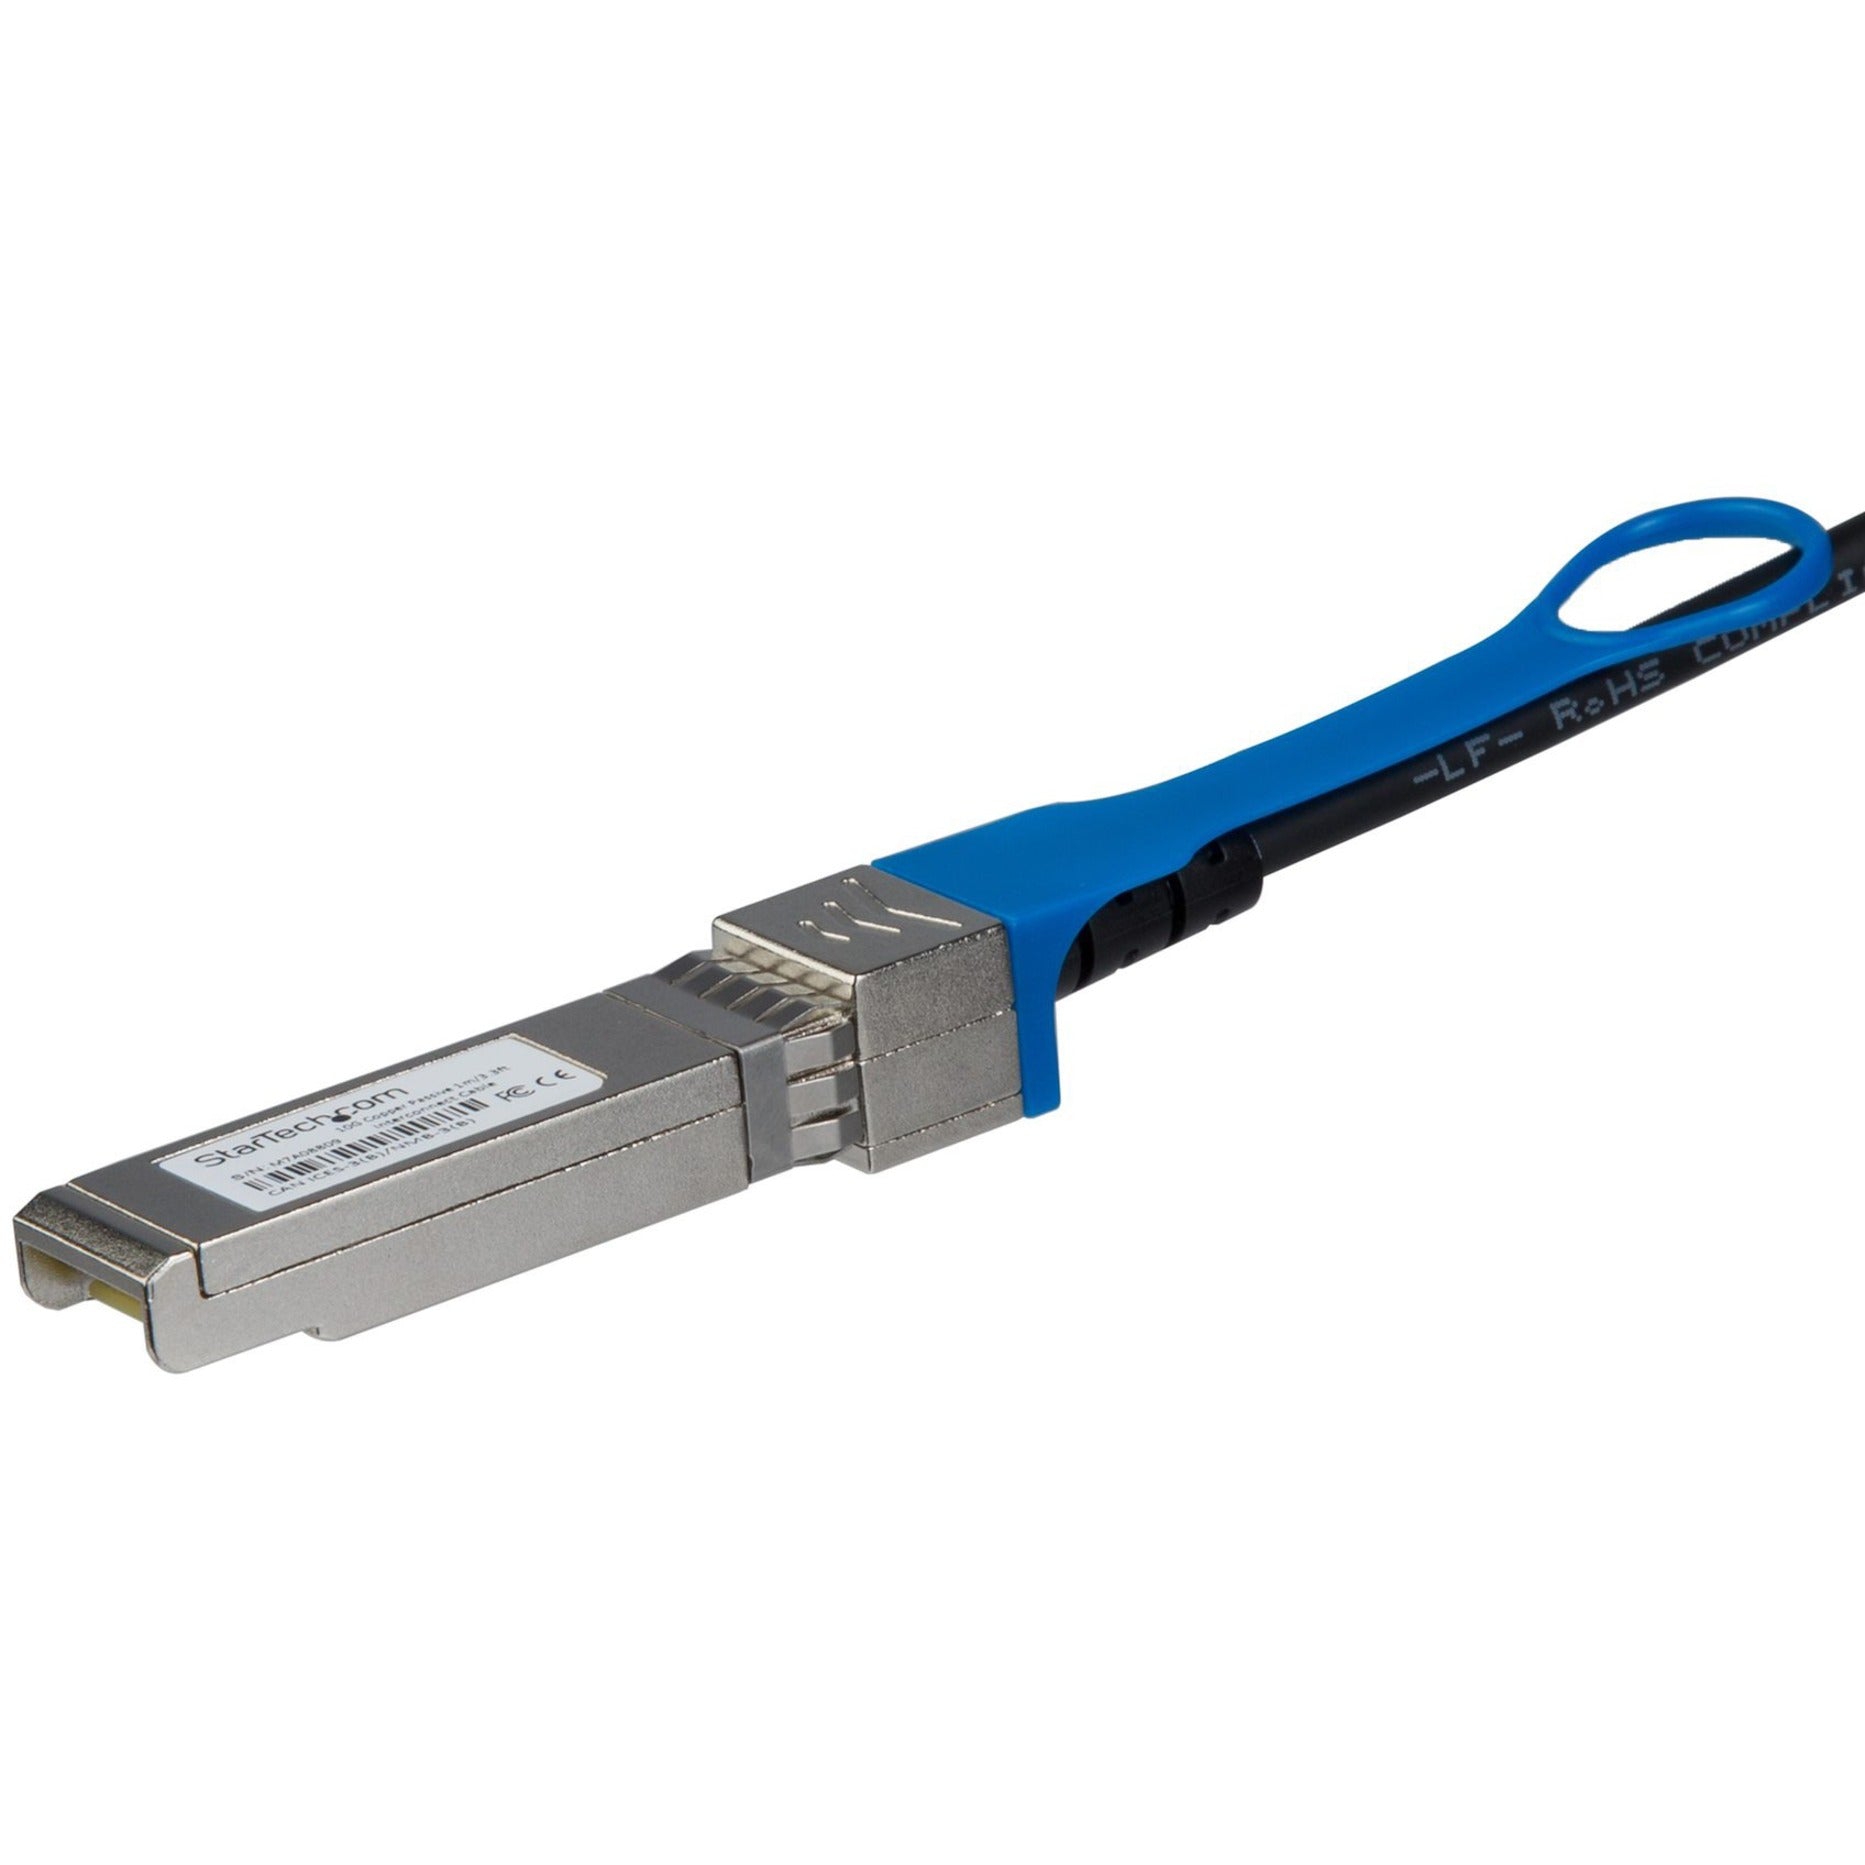 StarTech.com SFPH10GBACU7 SFP+ Direct Attach Cable - 7 m (23 ft.), Hot-swappable, Active, 10 Gbit/s